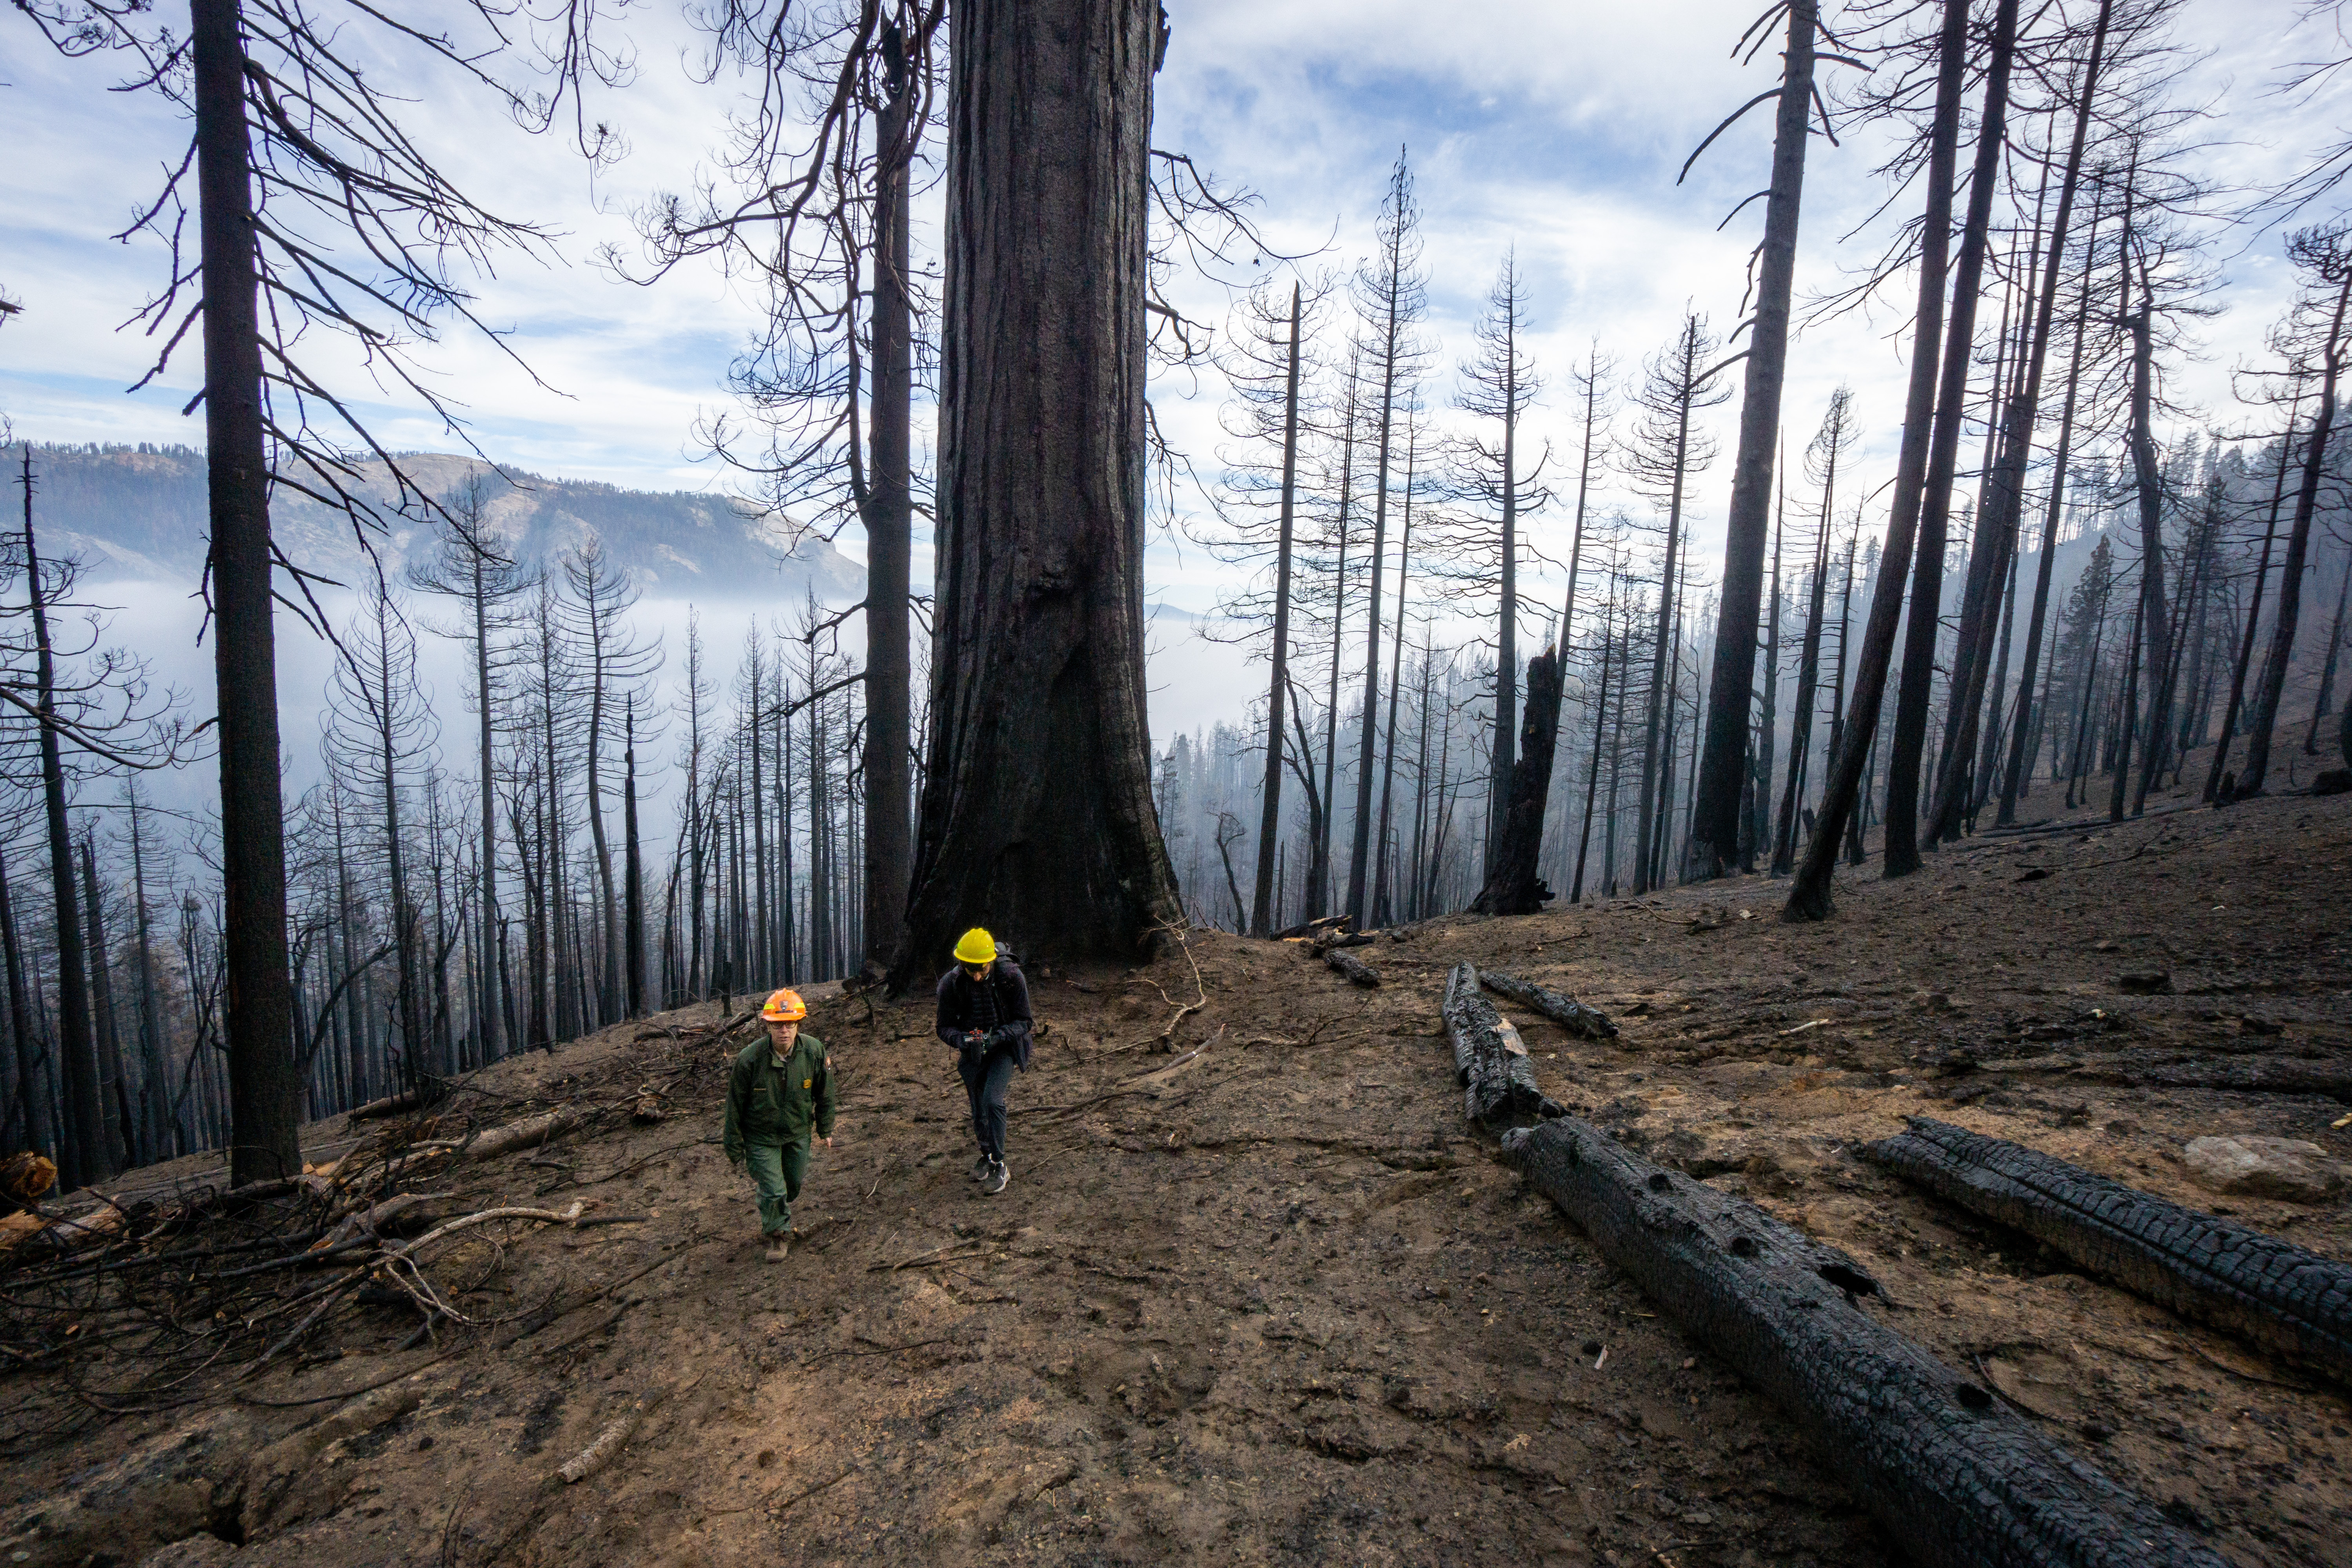 Two people with yellow hardhats and field clothes hike through an area that burned at high severity - the blackened trunks and branches of many dead trees can be seen behind them.